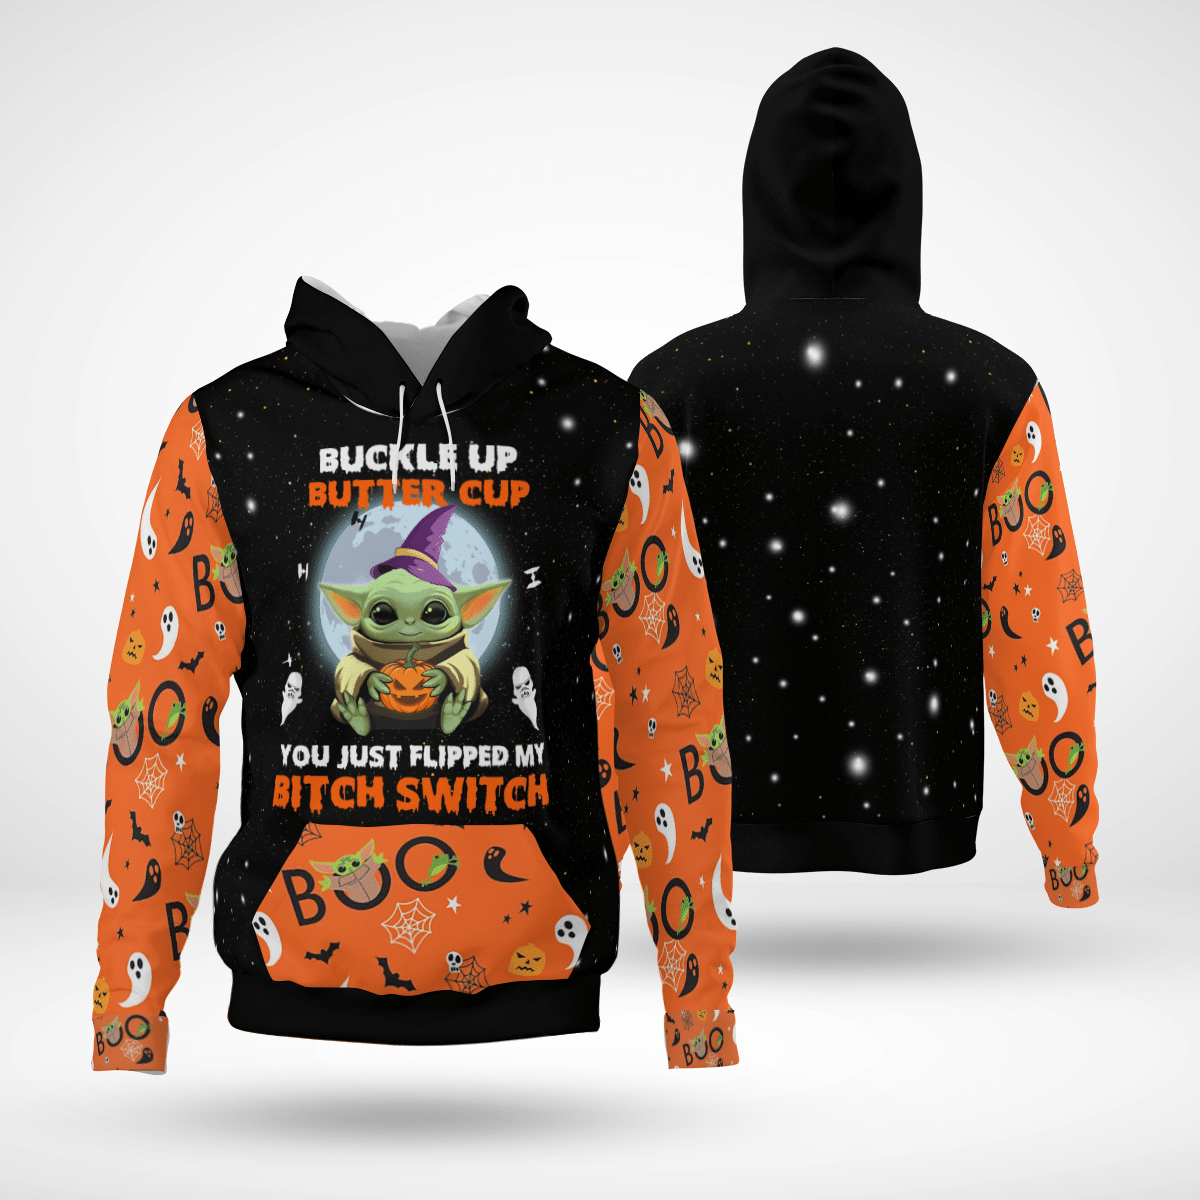 Baby Yoda buckle up butter cup you just flipped my bitch switch 3d hoodie  – LIMITED EDITION